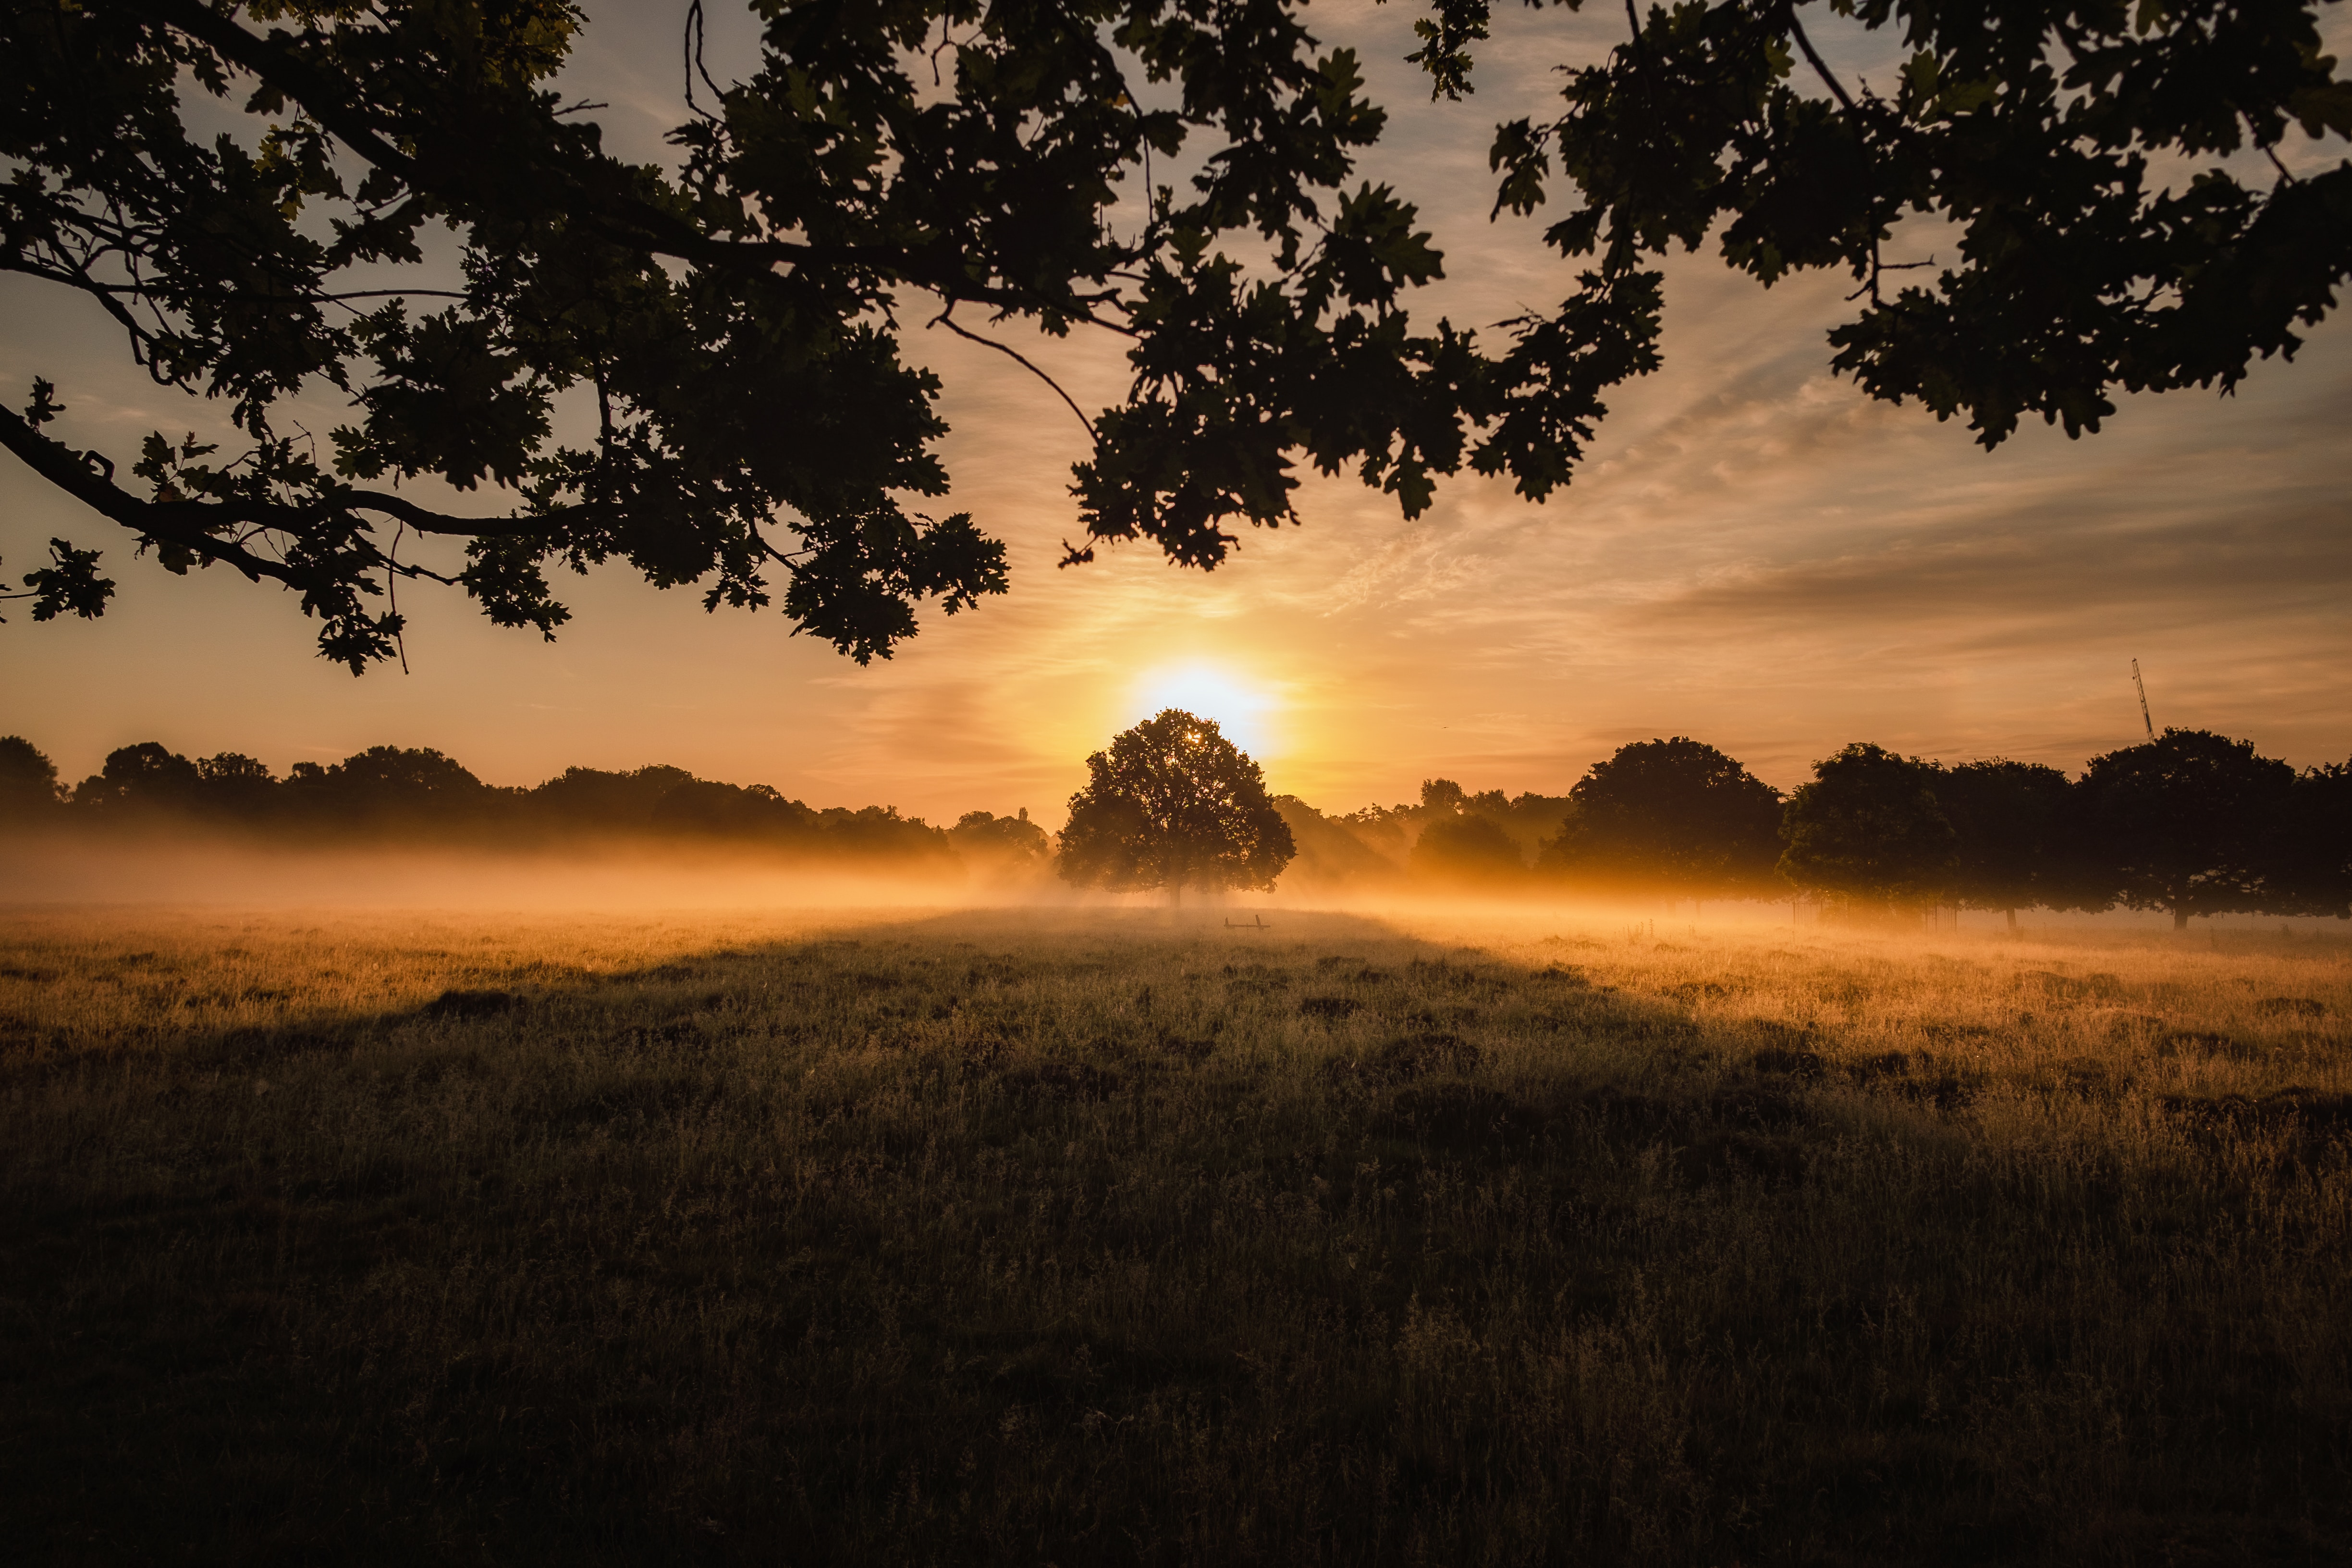 51436 download wallpaper landscape, nature, sunset, wood, tree, fog, lawn screensavers and pictures for free